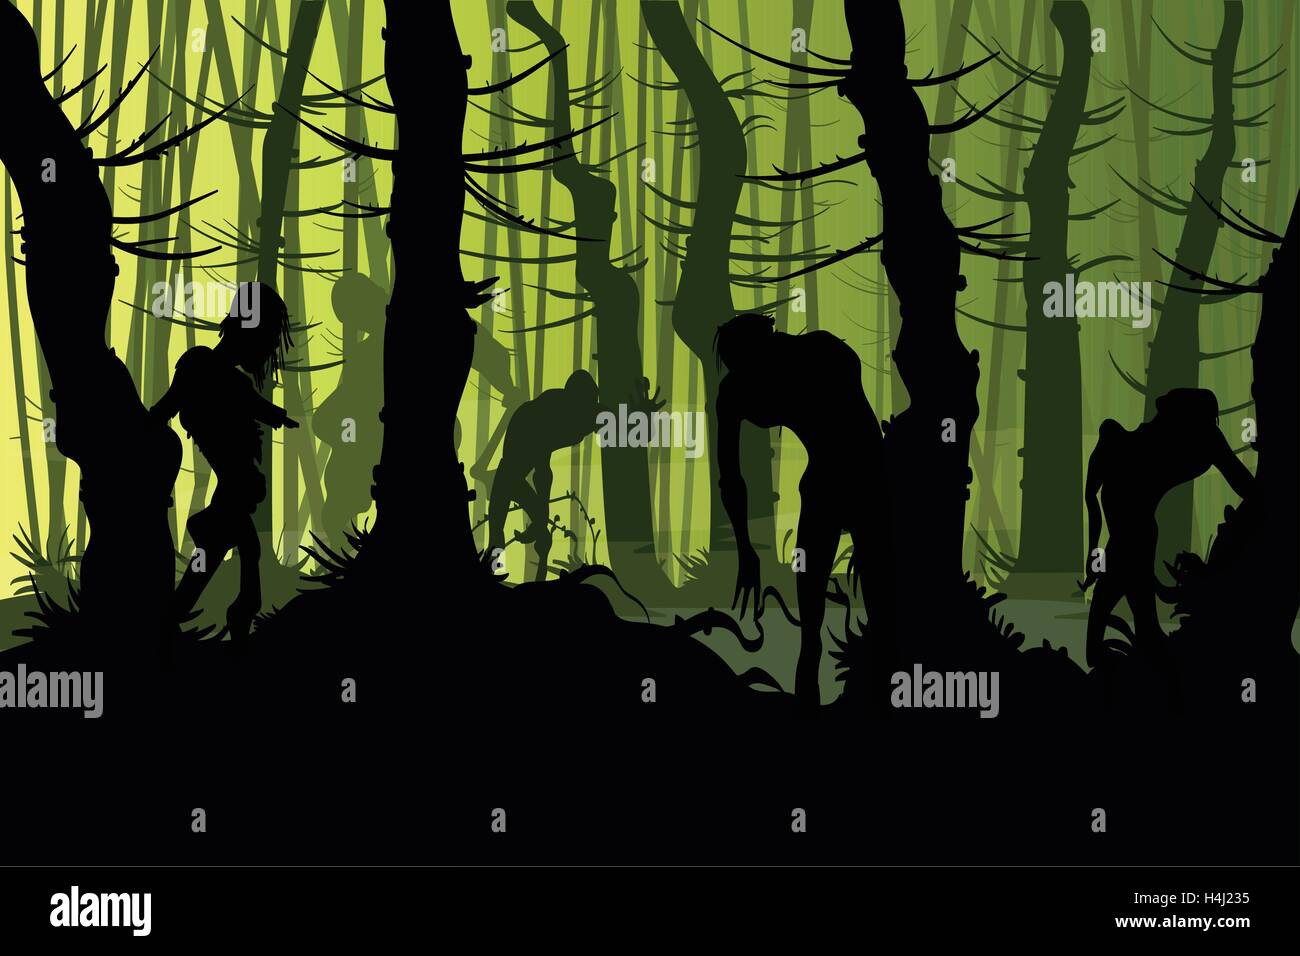 Vector illustration of zombies roaming a creepy night forest with mist Stock Vector